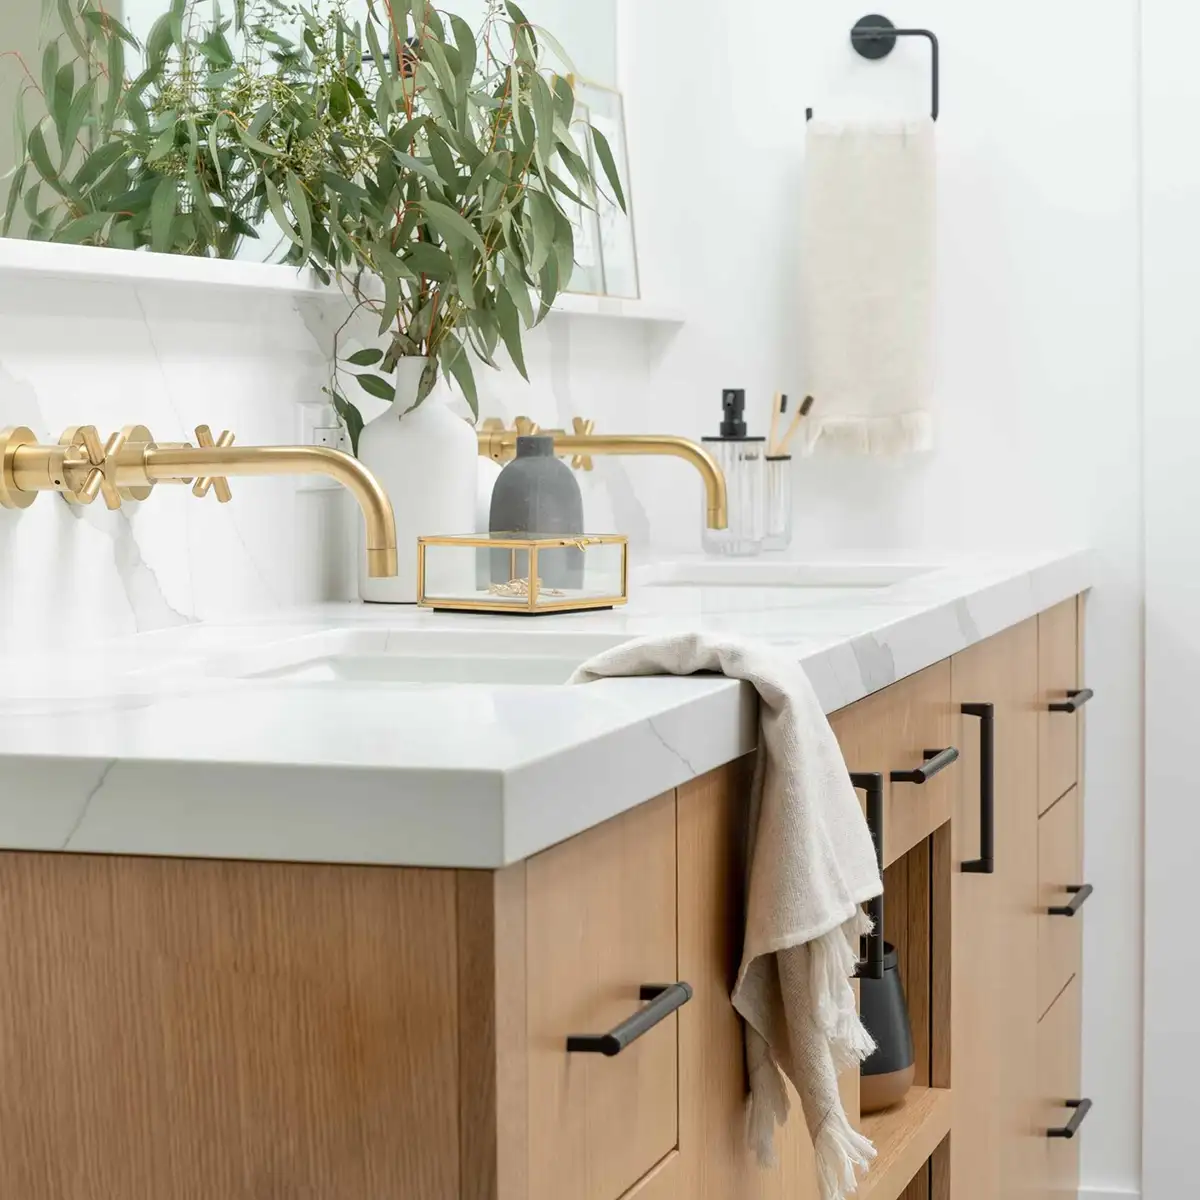 Bathroom Interior Design details of a sink surface with gold fixtures and a plant